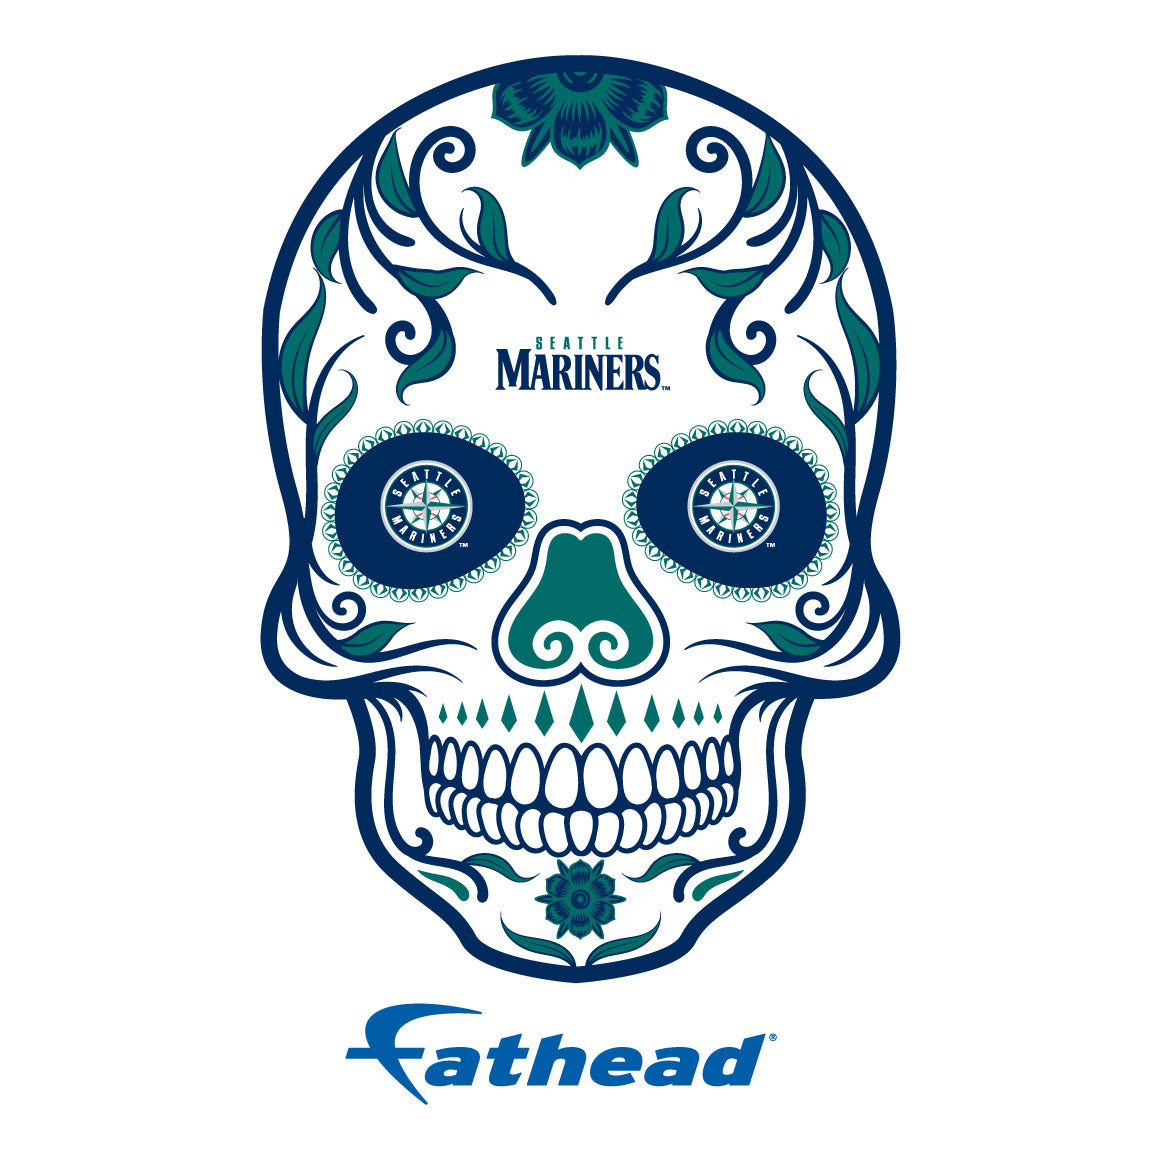 Sheet of 5 -Seattle Mariners: Skull Minis - Officially Licensed MLB Removable Adhesive Decal